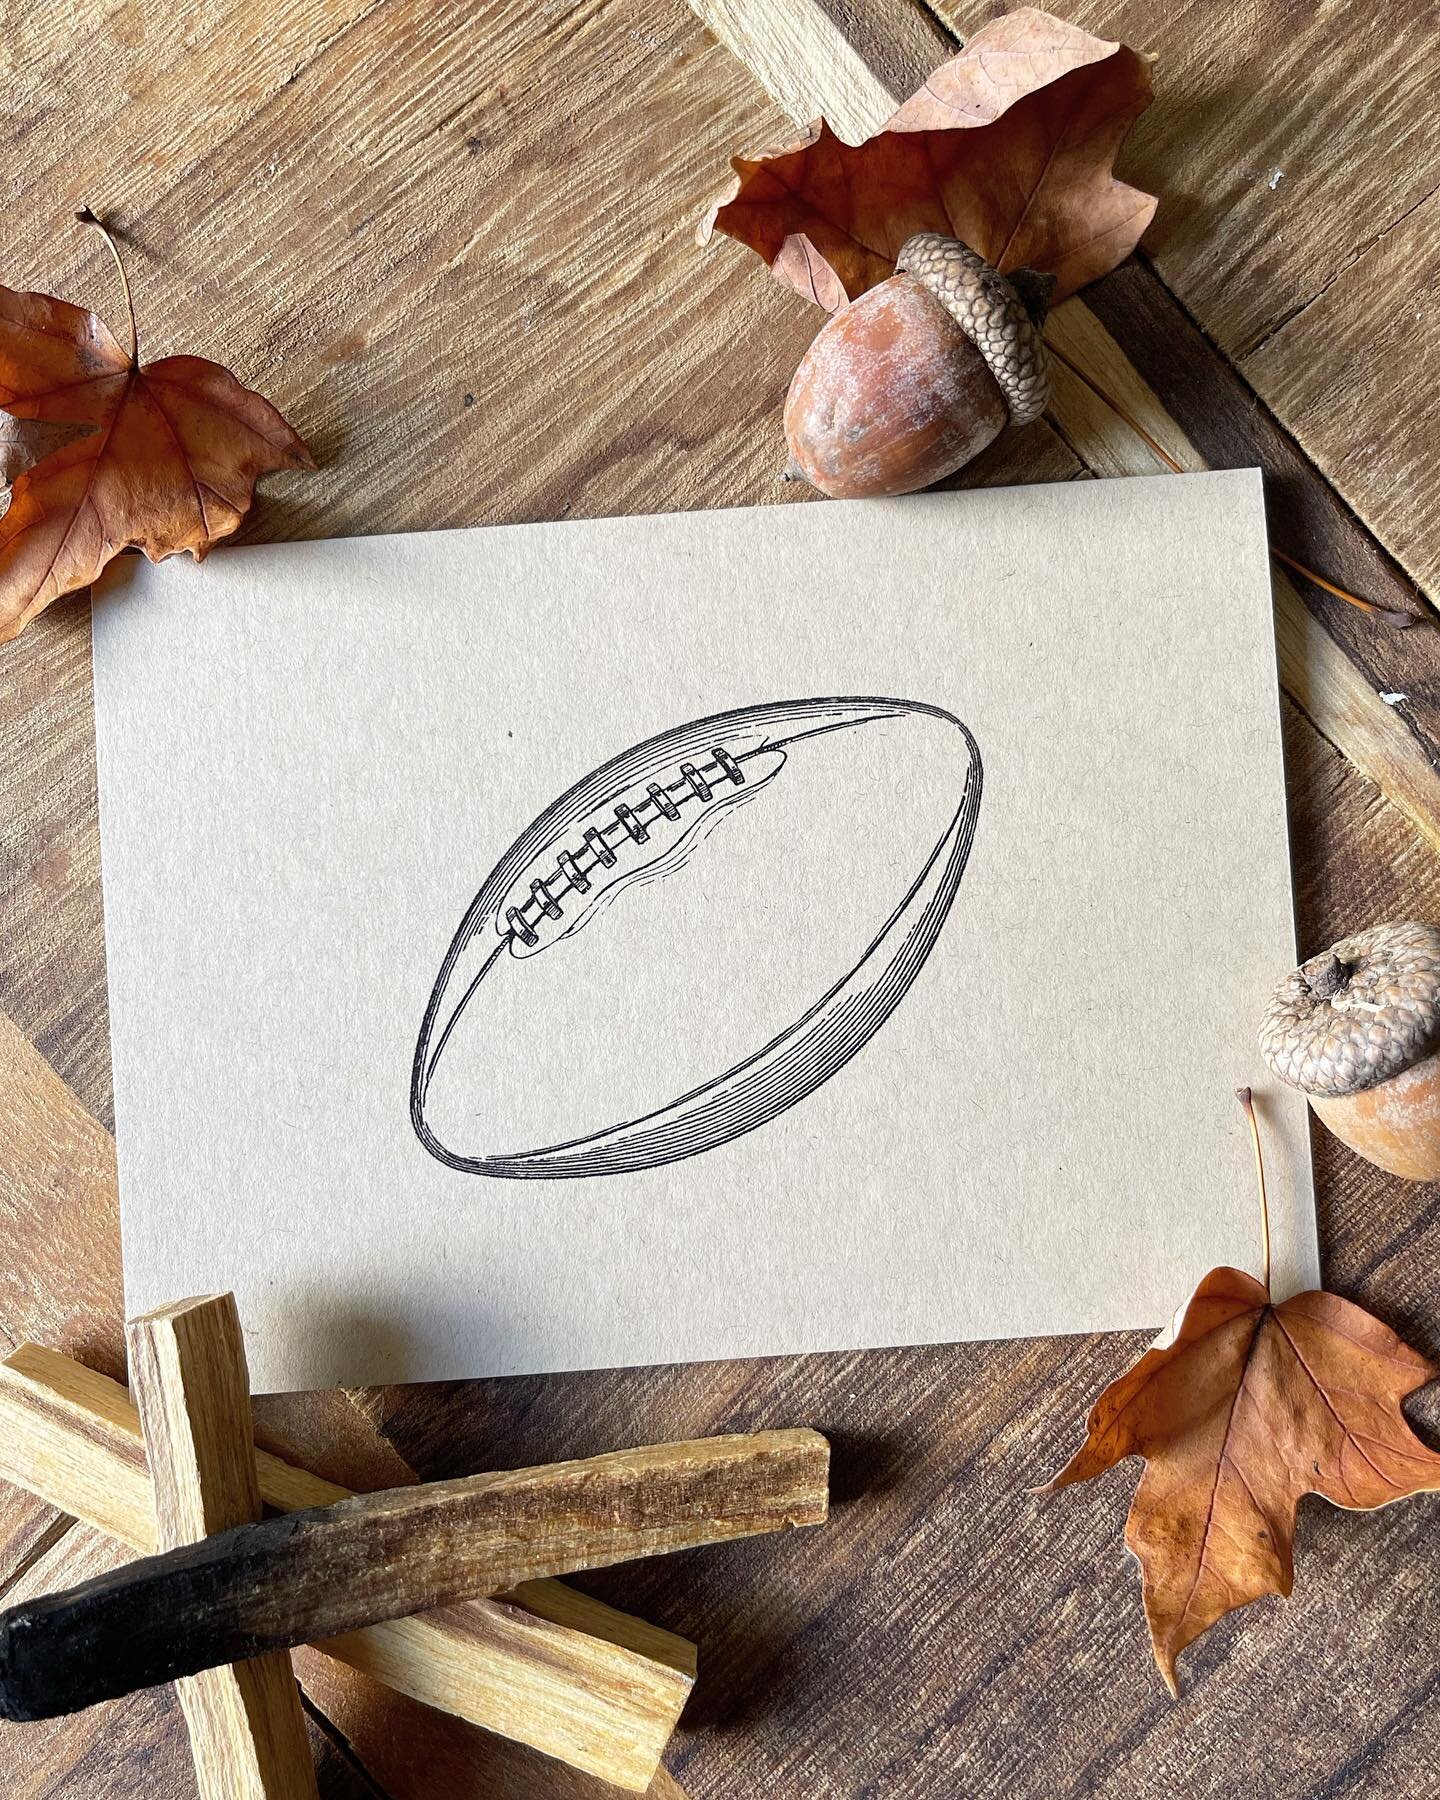 Cooler temps and fall around the corner? Must be time to release the newest collection!
.
.
.
.
.
#fall #fallvibes #football #footballtime #footballcards #footballgame #fallstyle #fallseason #footballlove #falltime #falltrends #footballfever #footbal